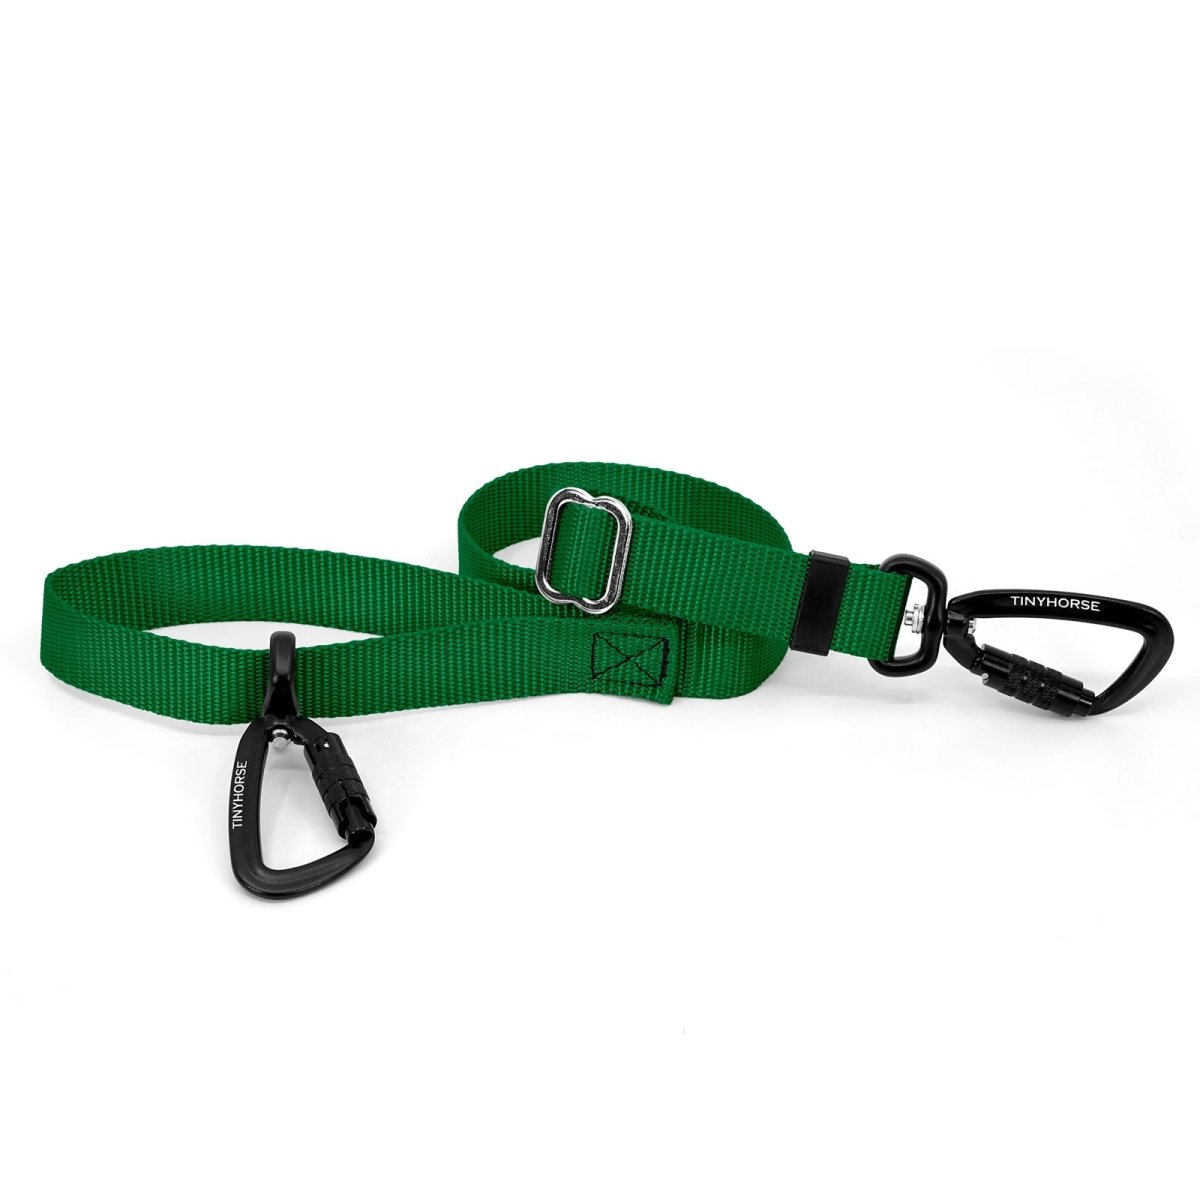 A green-coloured Lead-All Lite with an adjustable nylon webbing leash and 2 auto-locking carabiners